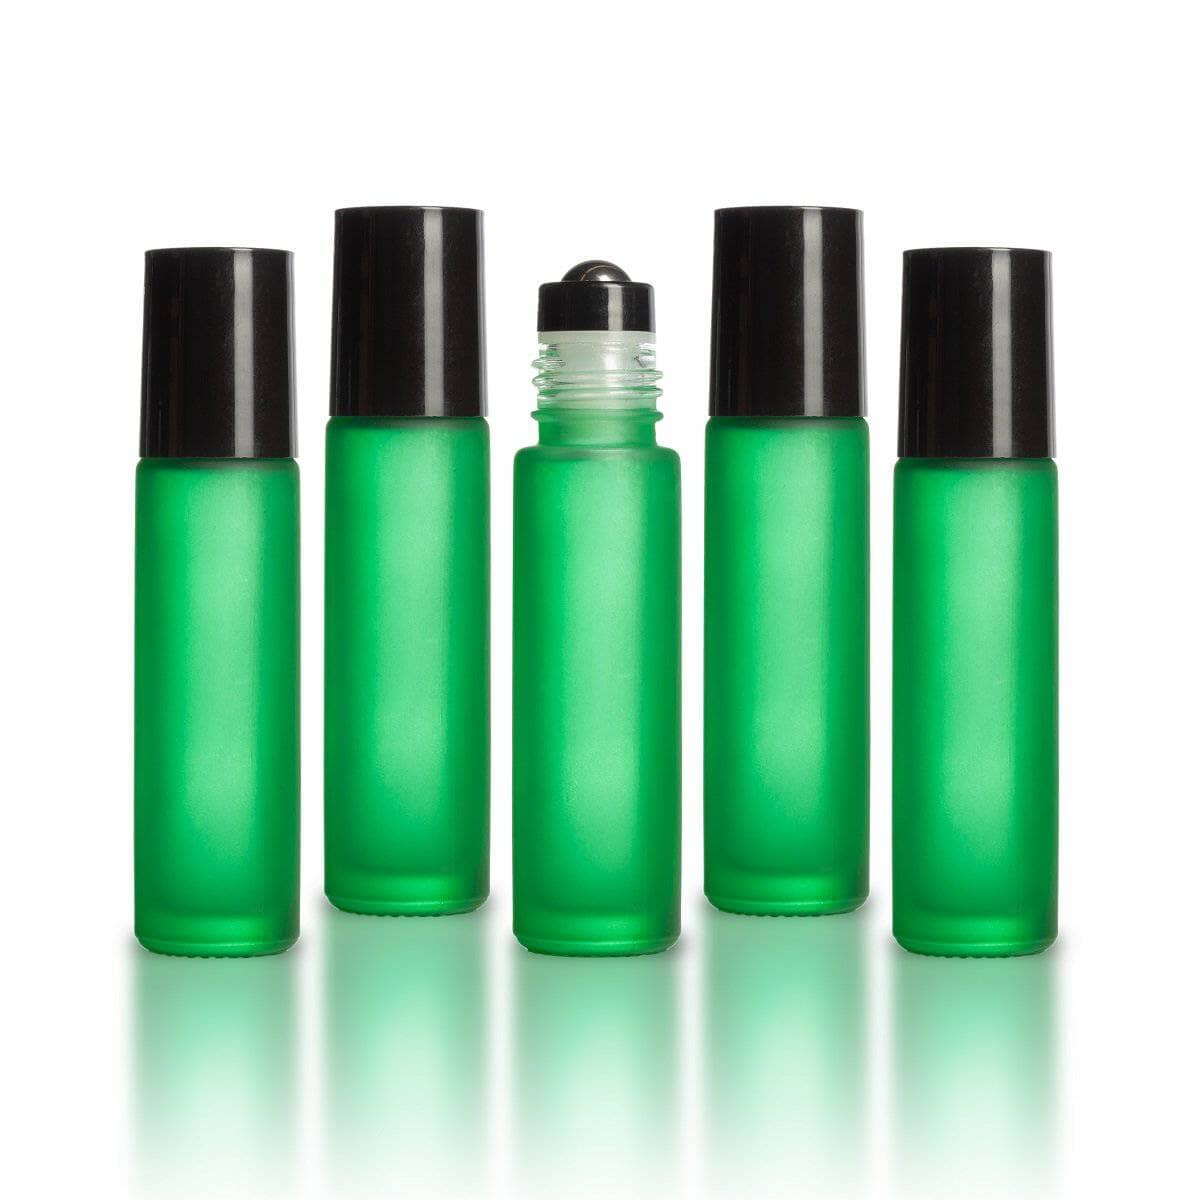 10 ml Green Frosted Bottles with Leak Guard™ Rollers (Pack of 5)I